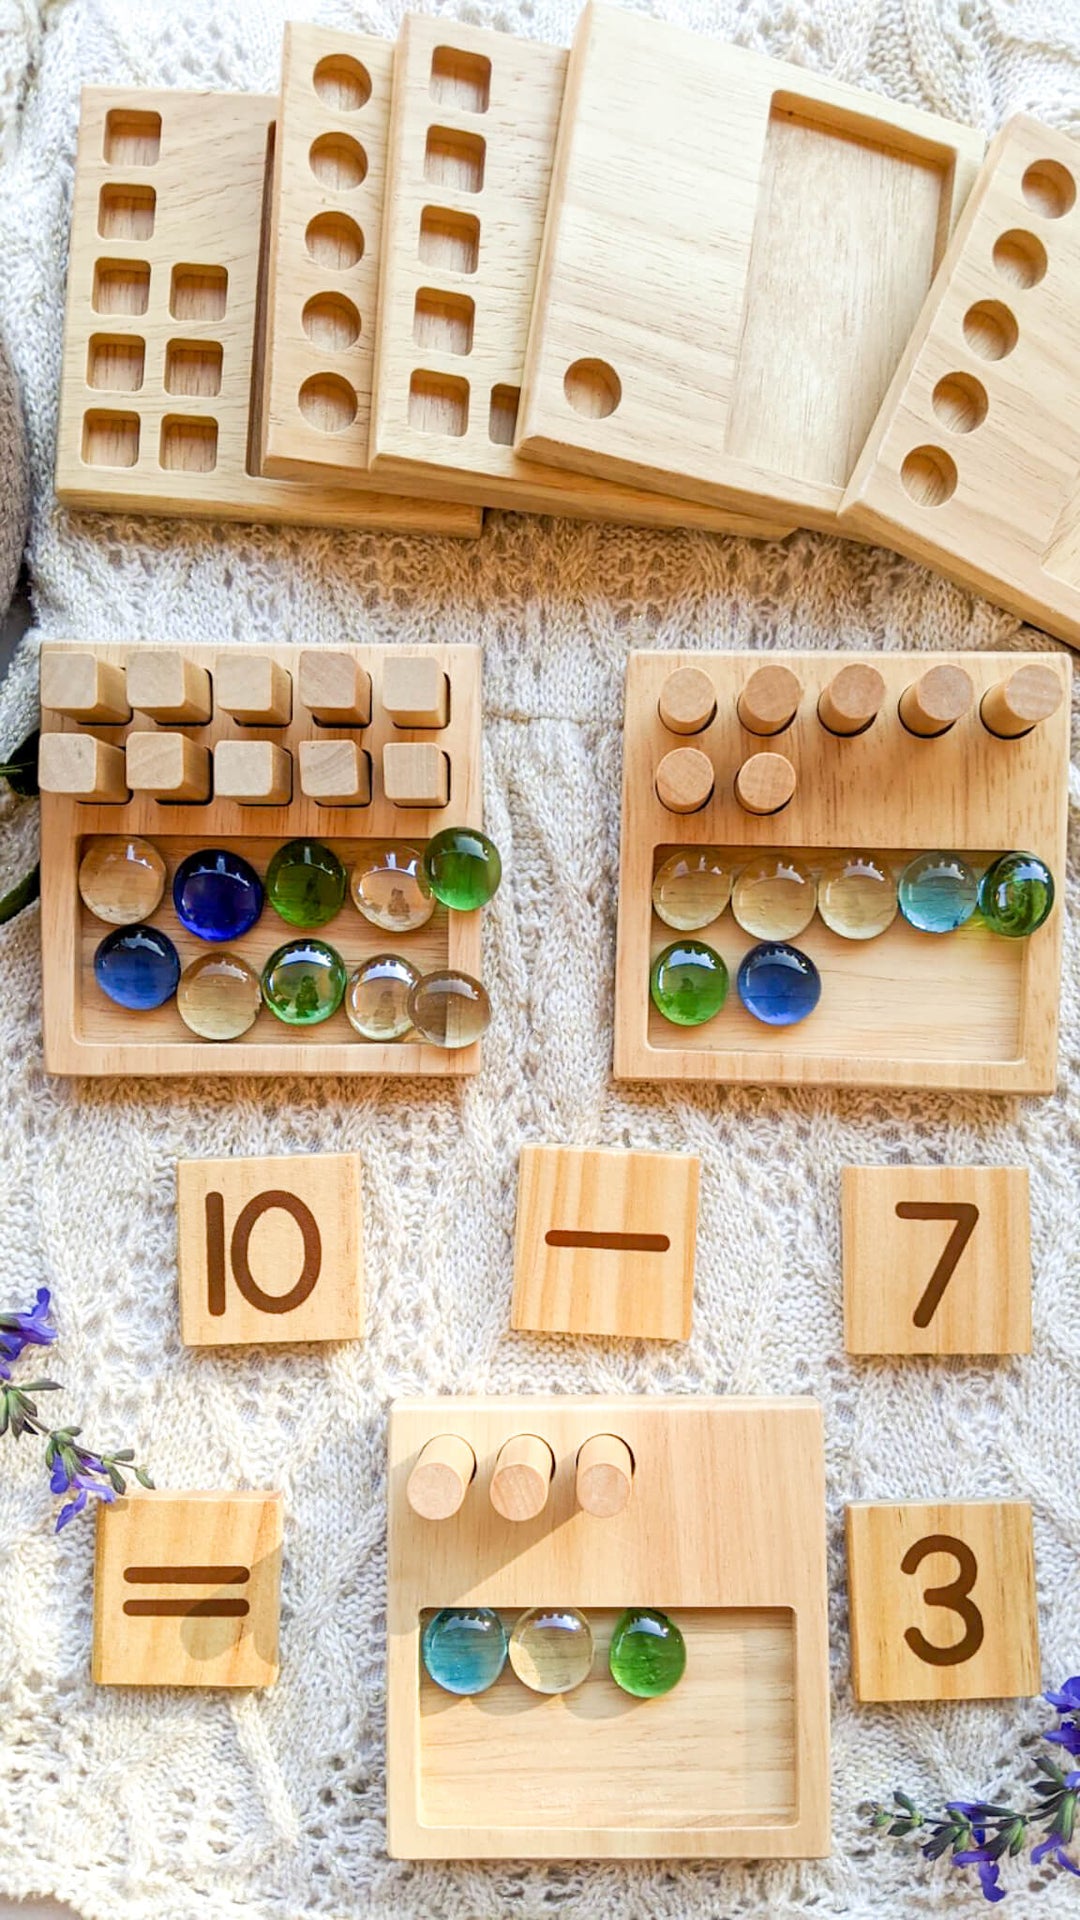 Tookyland Peg Board Toddler Toys, Counting Wooden Toys with 55 Pegs, Wooden Math Manipulatives,Montessori Math and Numbers for Kids & Kindergarten